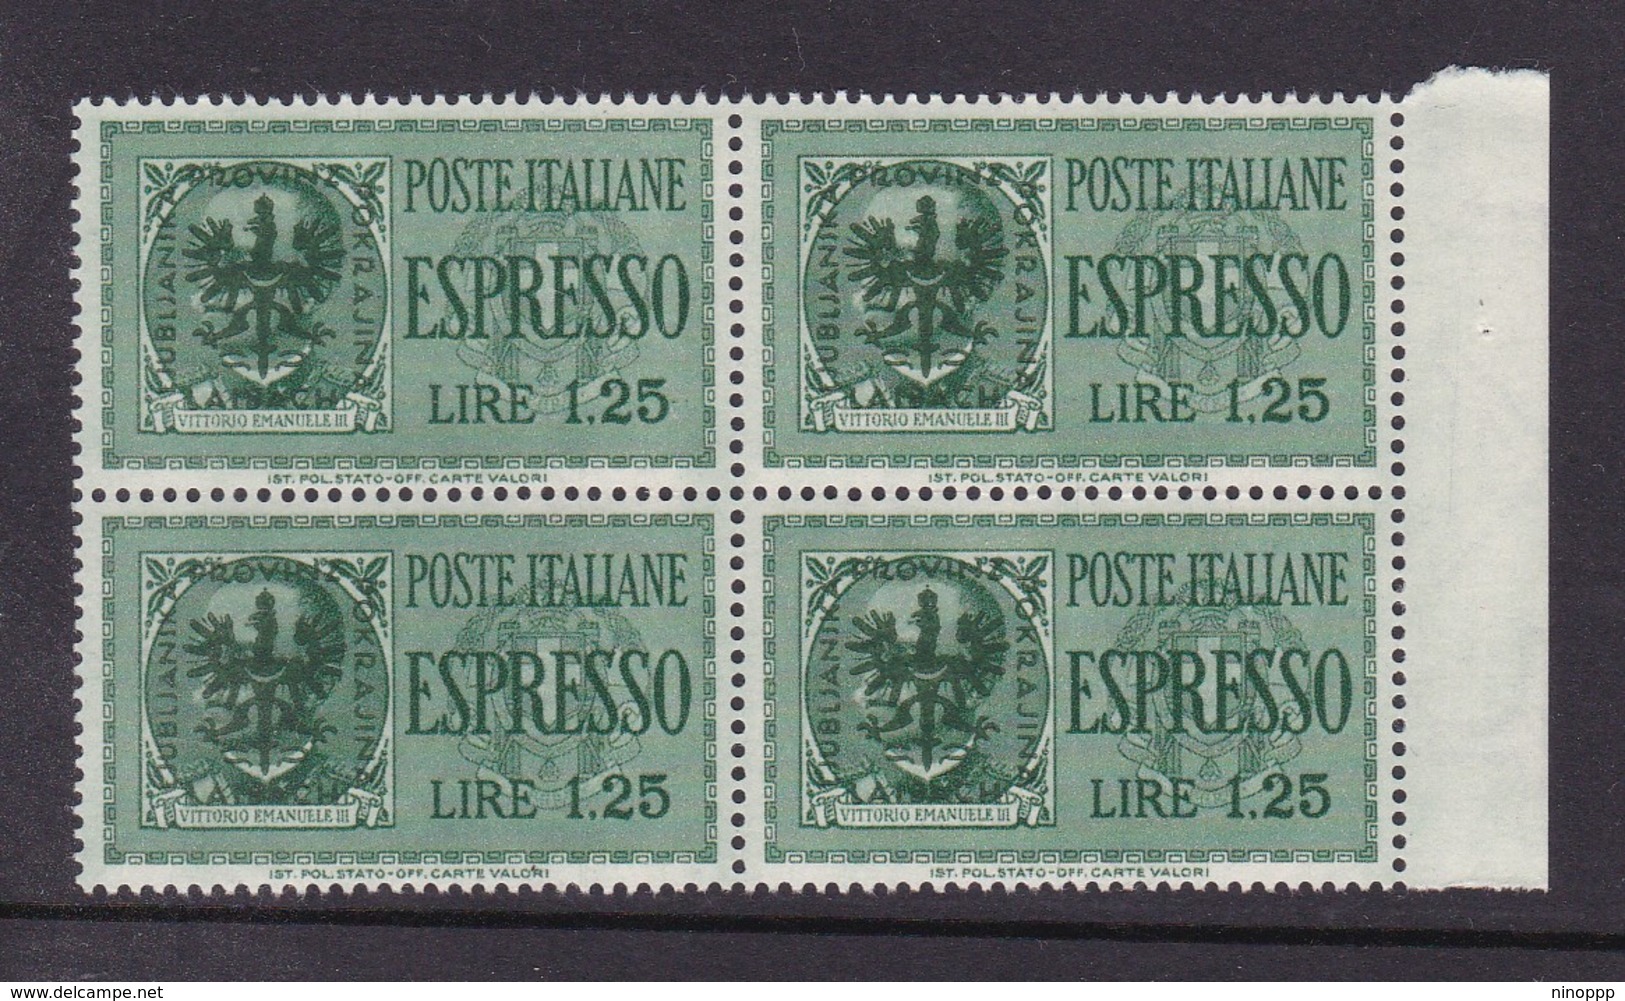 Italy-WWII Occupation-german Occupation Of Lubiana NE1 1944 Special Delivery , Block 4 Mint Never Hinged - German Occ.: Lubiana